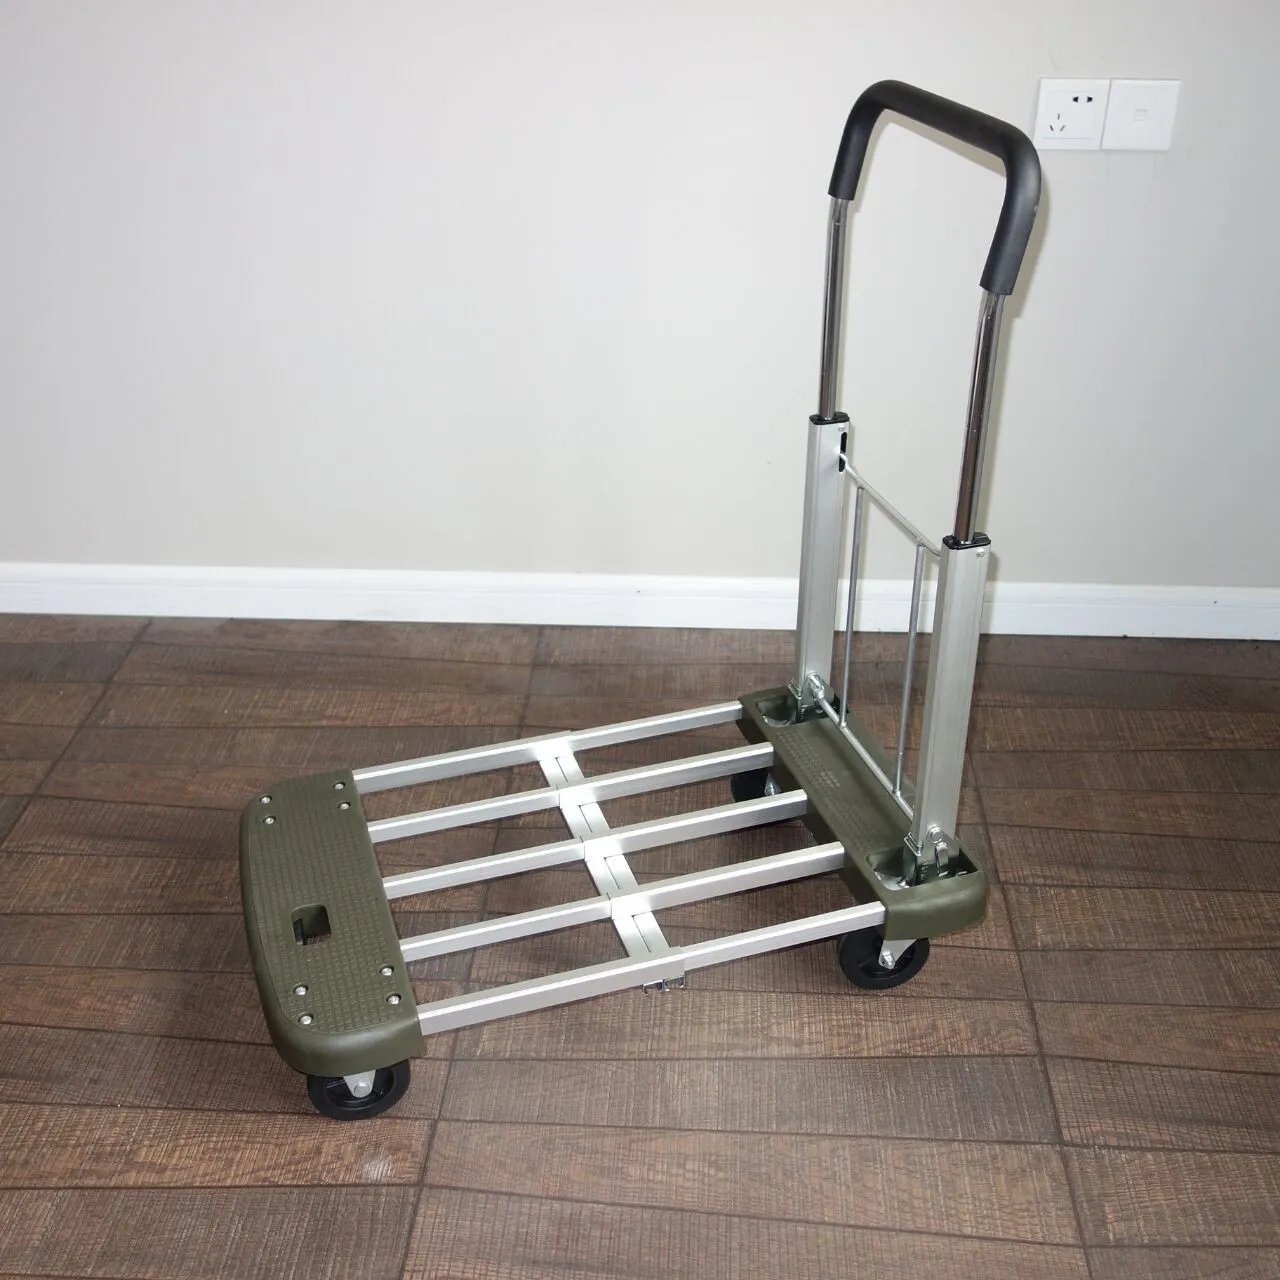 Large Capacity Ladder Furniture,Laundry Trolley Cart, Medical Emergency Cart Portable Laptop Trolley Cart